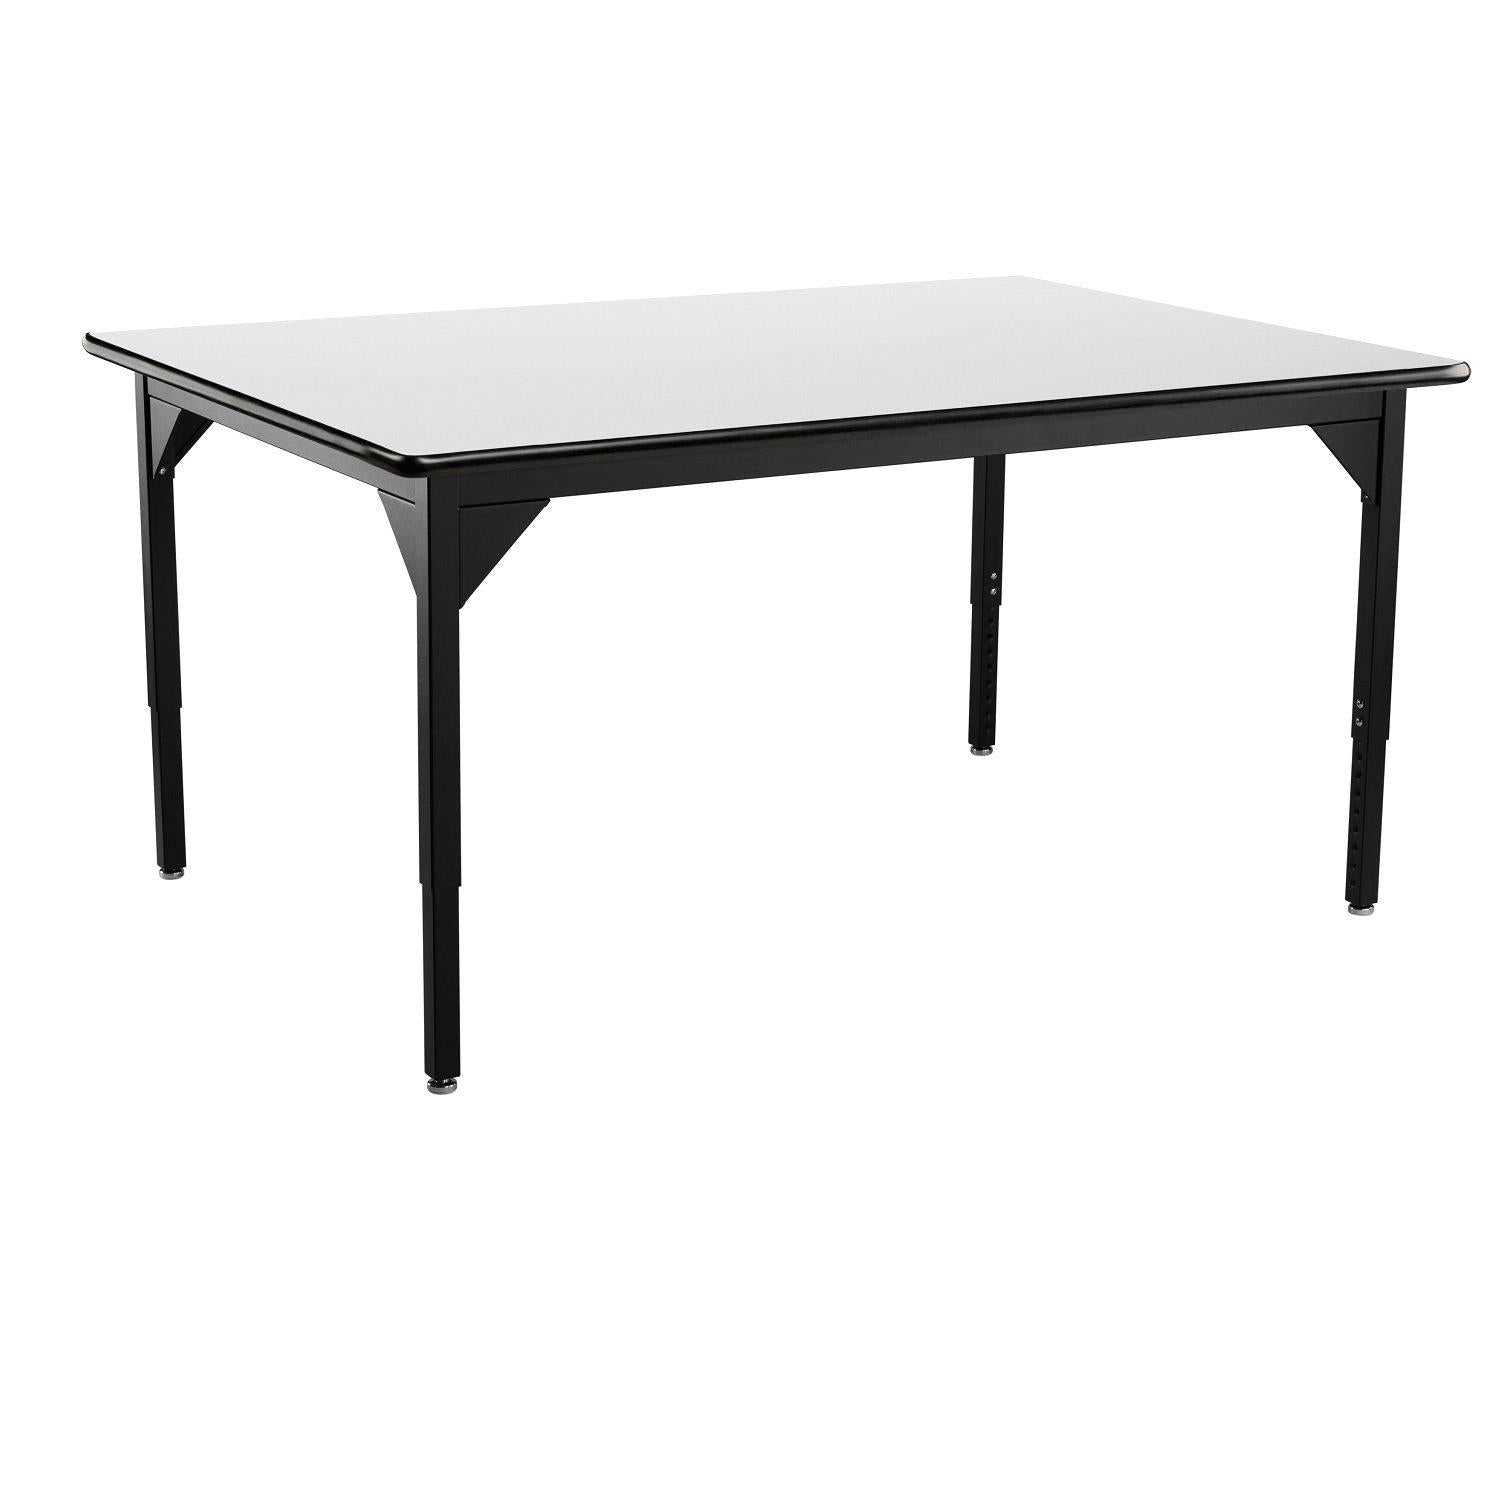 Heavy-Duty Height-Adjustable Utility Table, Black Frame, 48" x 48", Whiteboard High-Pressure Laminate Top